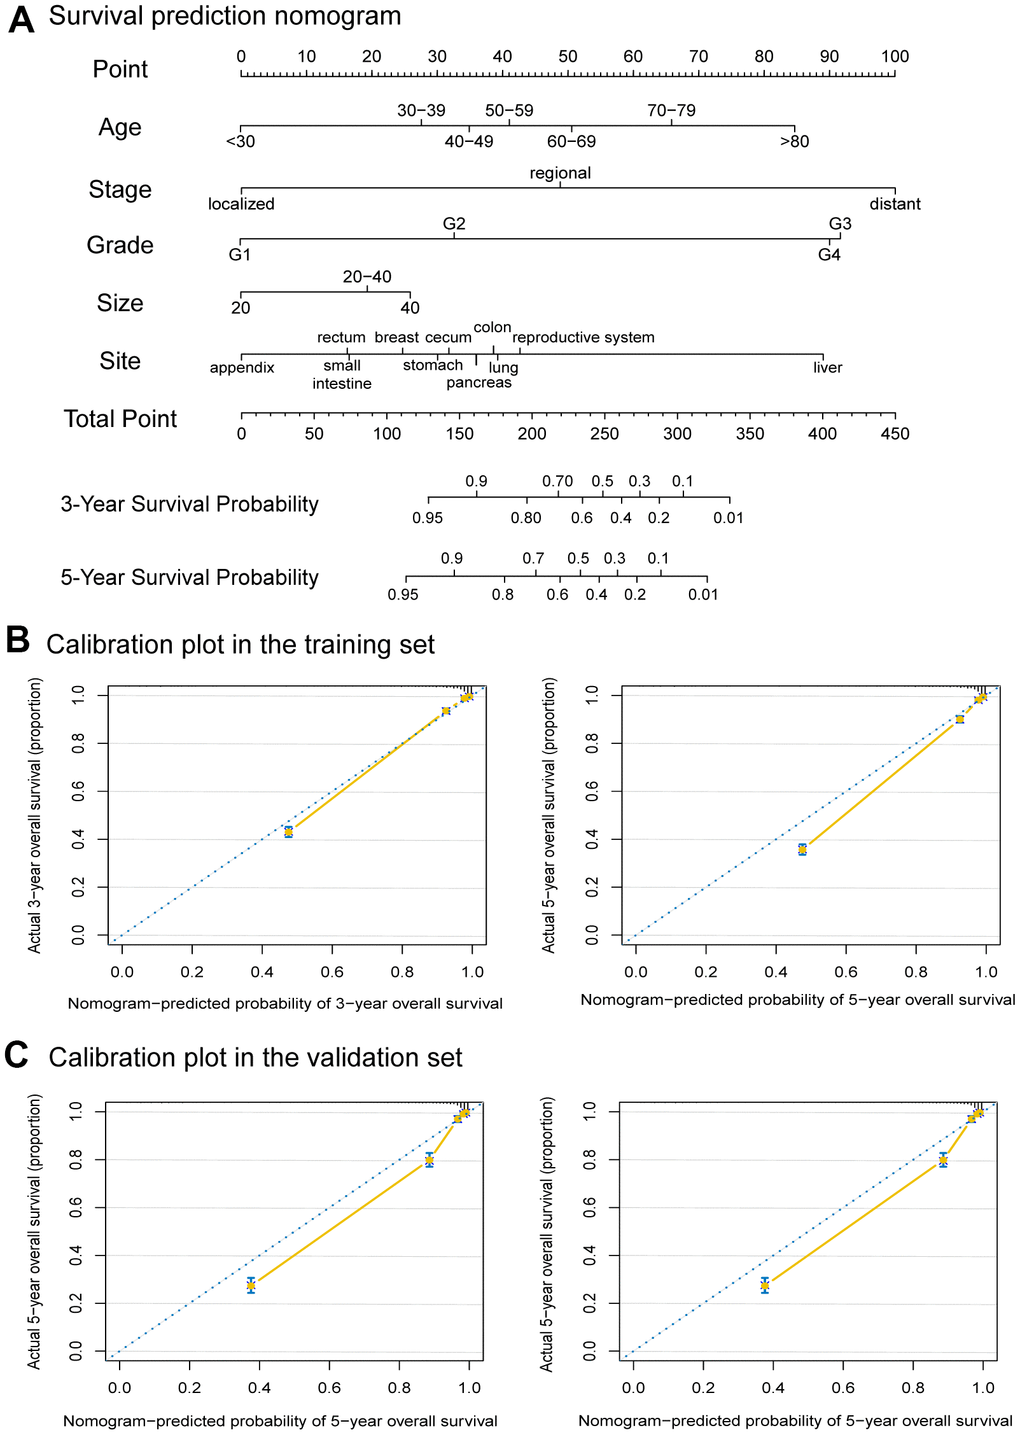 Nomogram to predict the 3-Year and 5-Year survival probabilities of female neuroendocrine neoplasms (fNENs) patients and the calibration of the nomogram using the training and validation sets. (A) Points for age, disease stage, tumor grade, tumor size, and primary tumor site are obtained by drawing a line upward from the corresponding values to the “Points” line. The sum of the points of these 5 factors is located on the “Total points” line, and a line projected down to the bottom scales determines the probabilities of 3-year and 5-year overall survival (OS). (B) Calibration plots of the nomogram for 3-year and 5-year survival probabilities in the training set. (C) Calibration plots of the nomogram for 3-year and 5-year survival probabilities in the validation set.